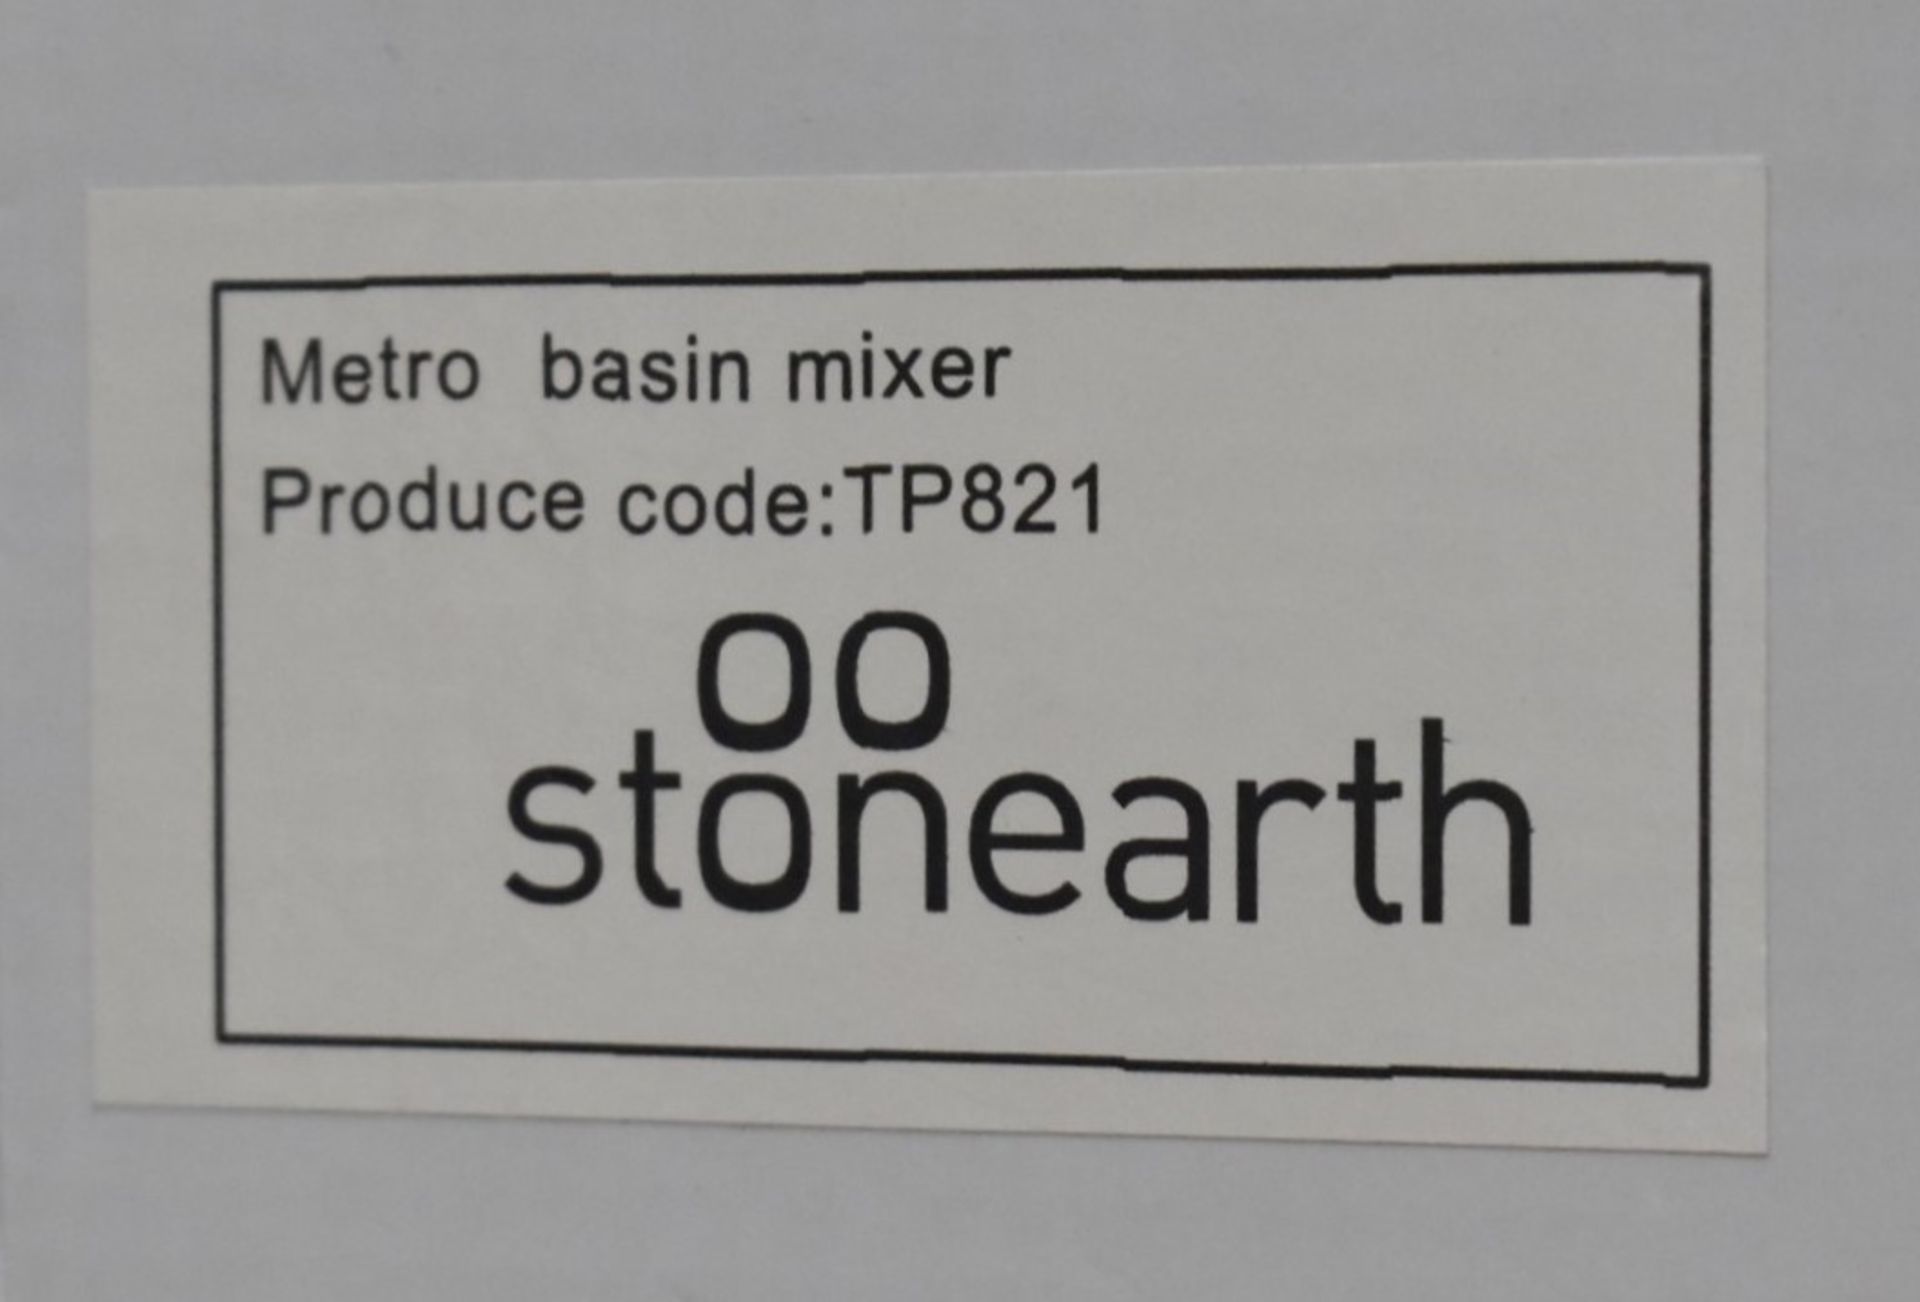 1 x Stonearth 'Metro' Stainless Steel Basin Mixer Tap - Brand New & Boxed - RRP £245 - Ref: TP821 - Image 8 of 13